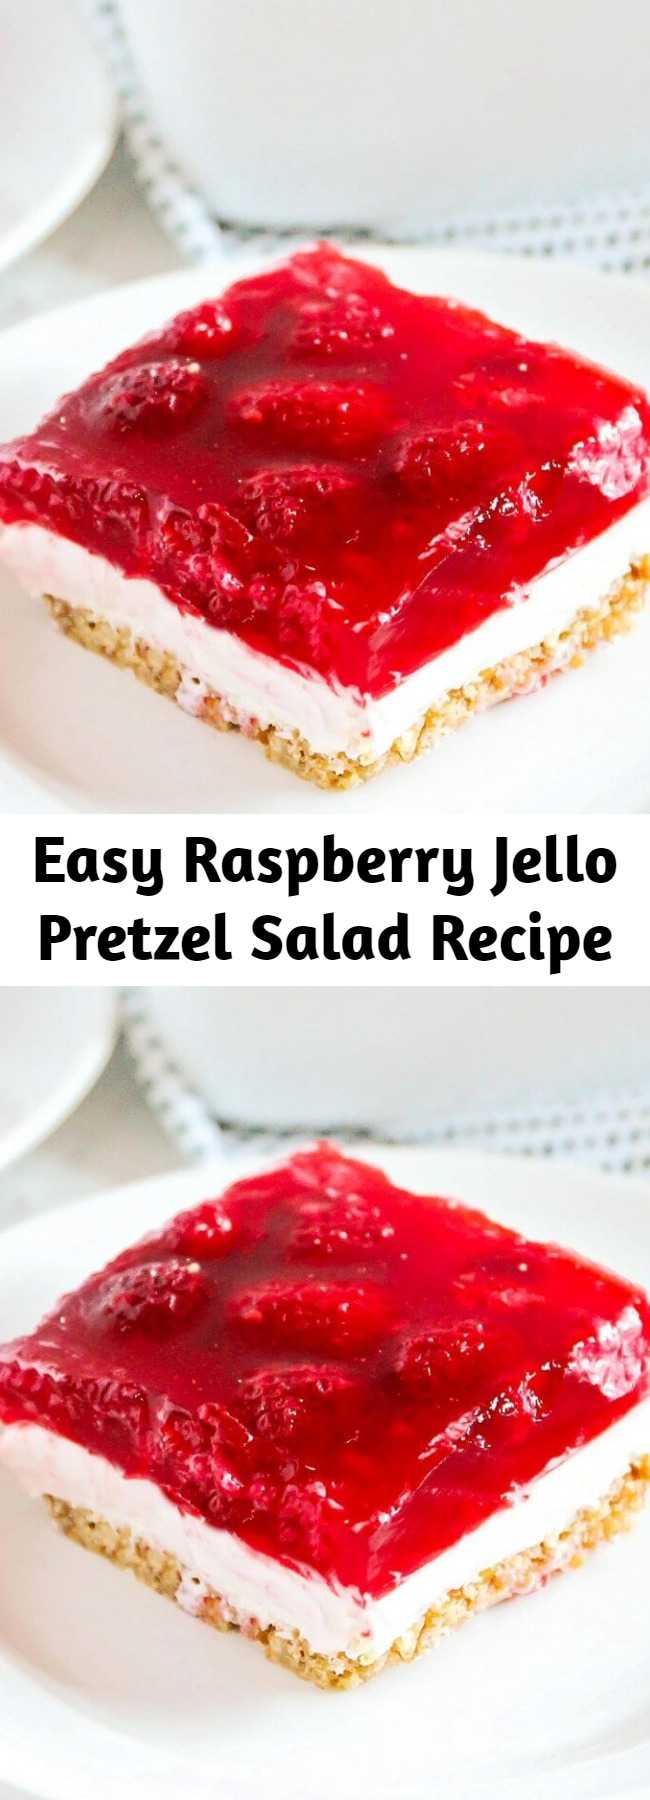 Easy Raspberry Jello Pretzel Salad Recipe - One of my favorite jello salad recipes! The cream cheese mixture and salted pretzel crust mixed with the raspberry jello is the perfect combo. A little sweet, a little salty and a LOT of deliciousness! #berries #jello #creamcheese #cheesecake #pretzels #thanksgiving #dessert #holidaydessert